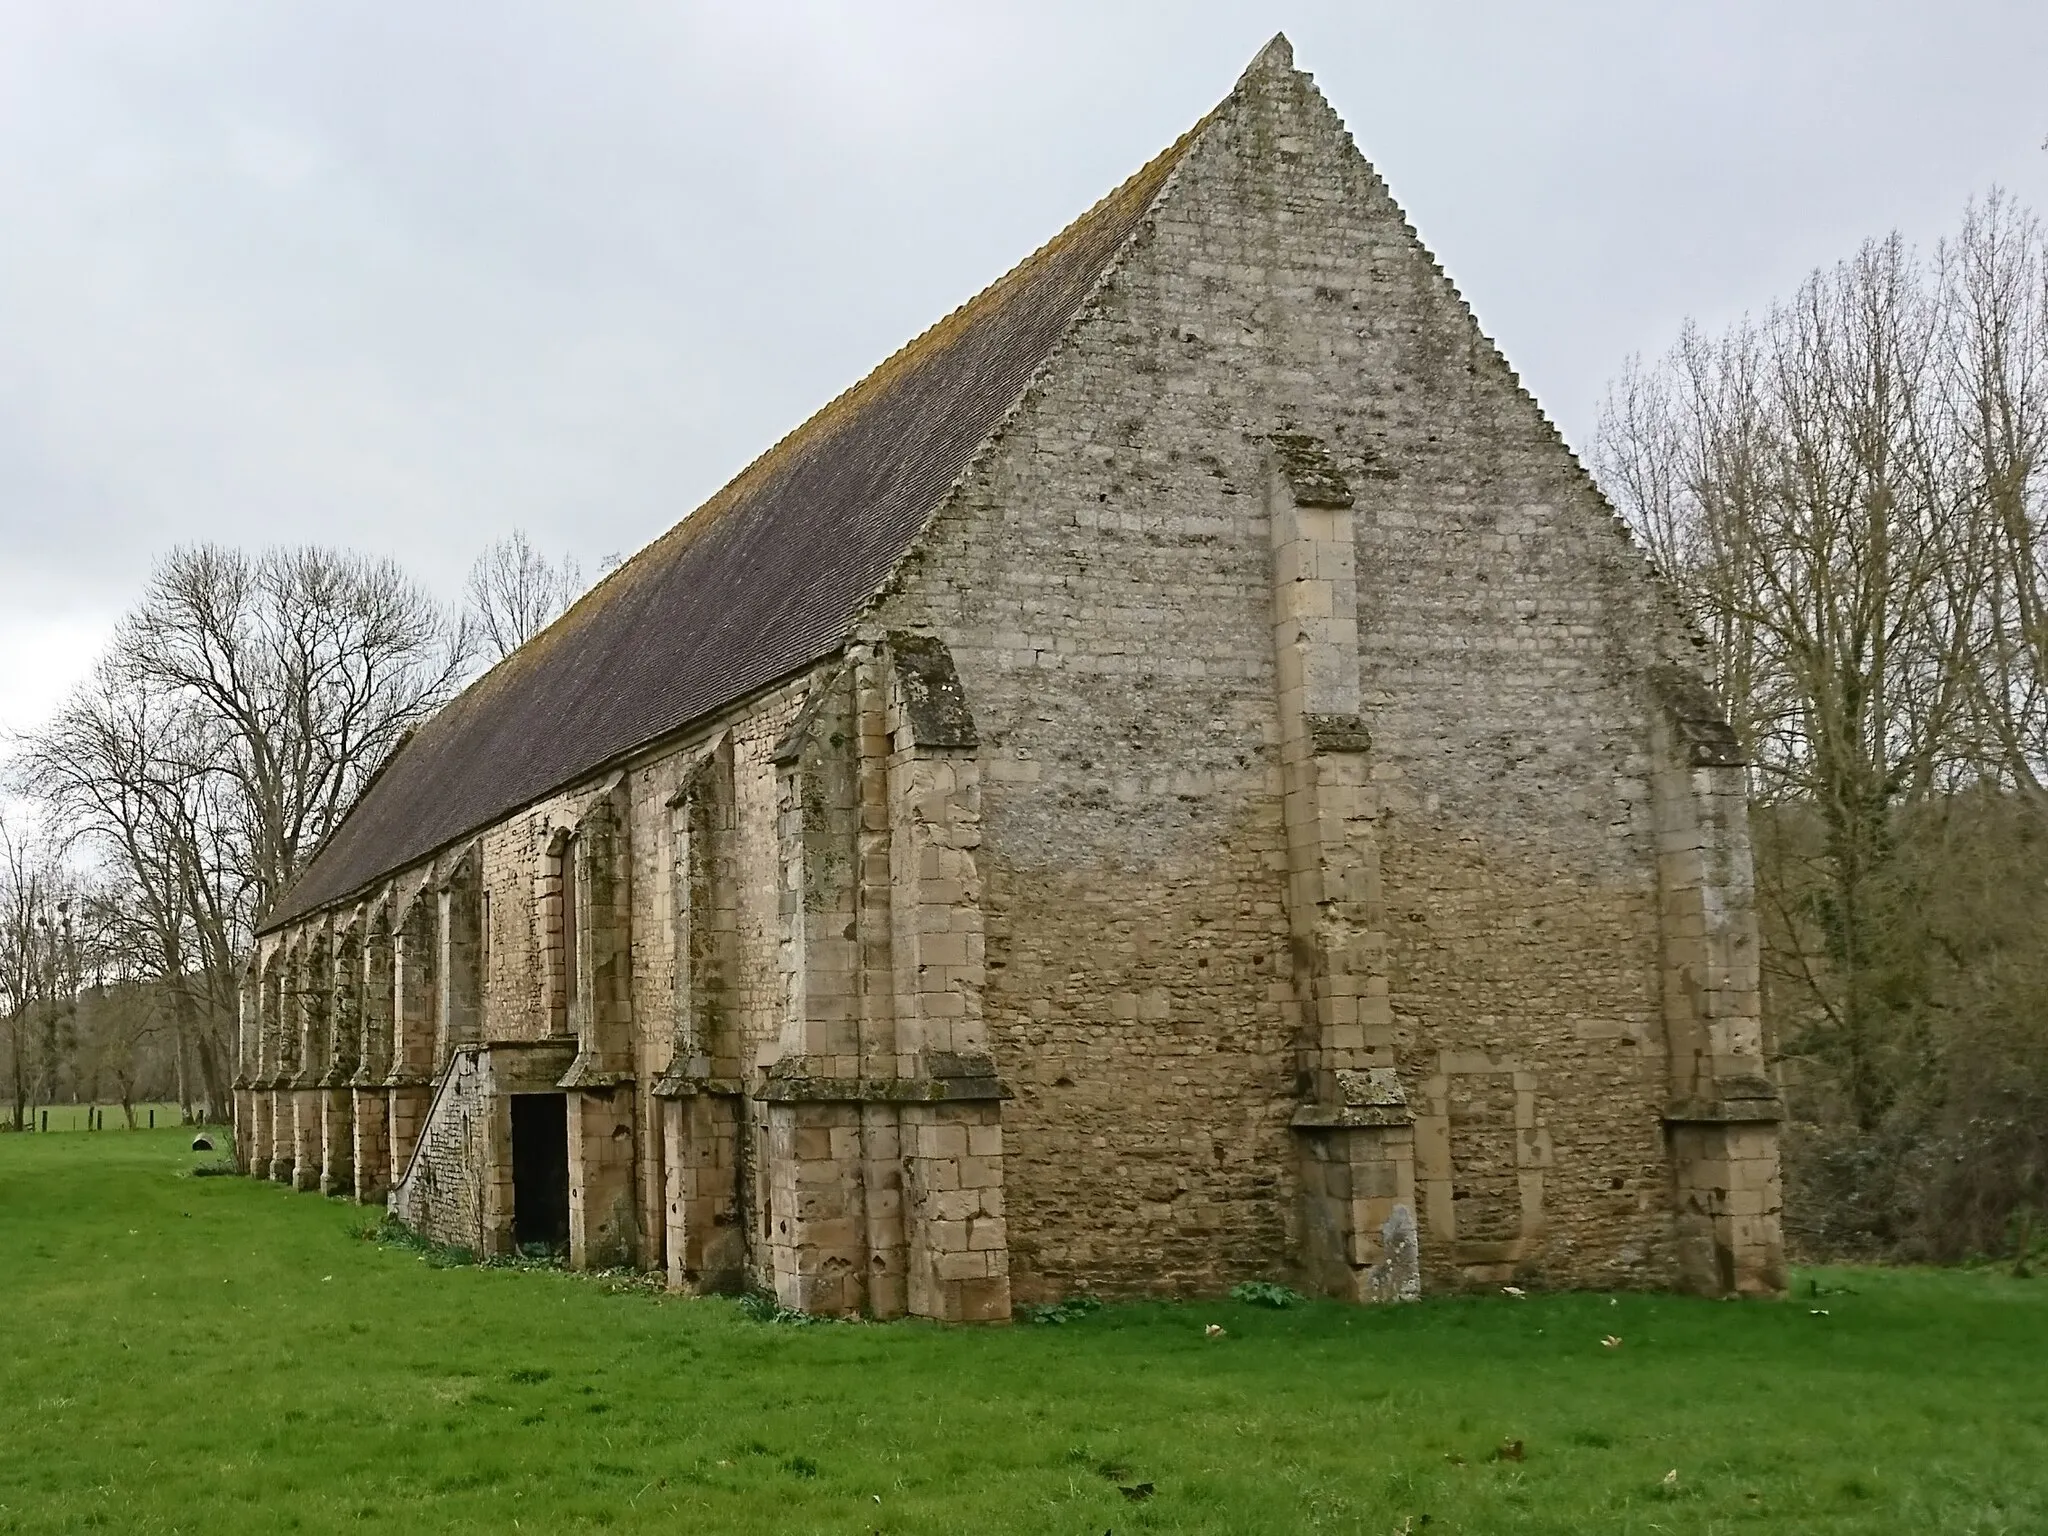 Photo showing: The twelfth-century remains of the abbey of St-Etienne-de-Fontenay in St André sur Orne (Calvados), Normandy, founded by Raoul Taisson (Tesson) in the mid-eleventh century,